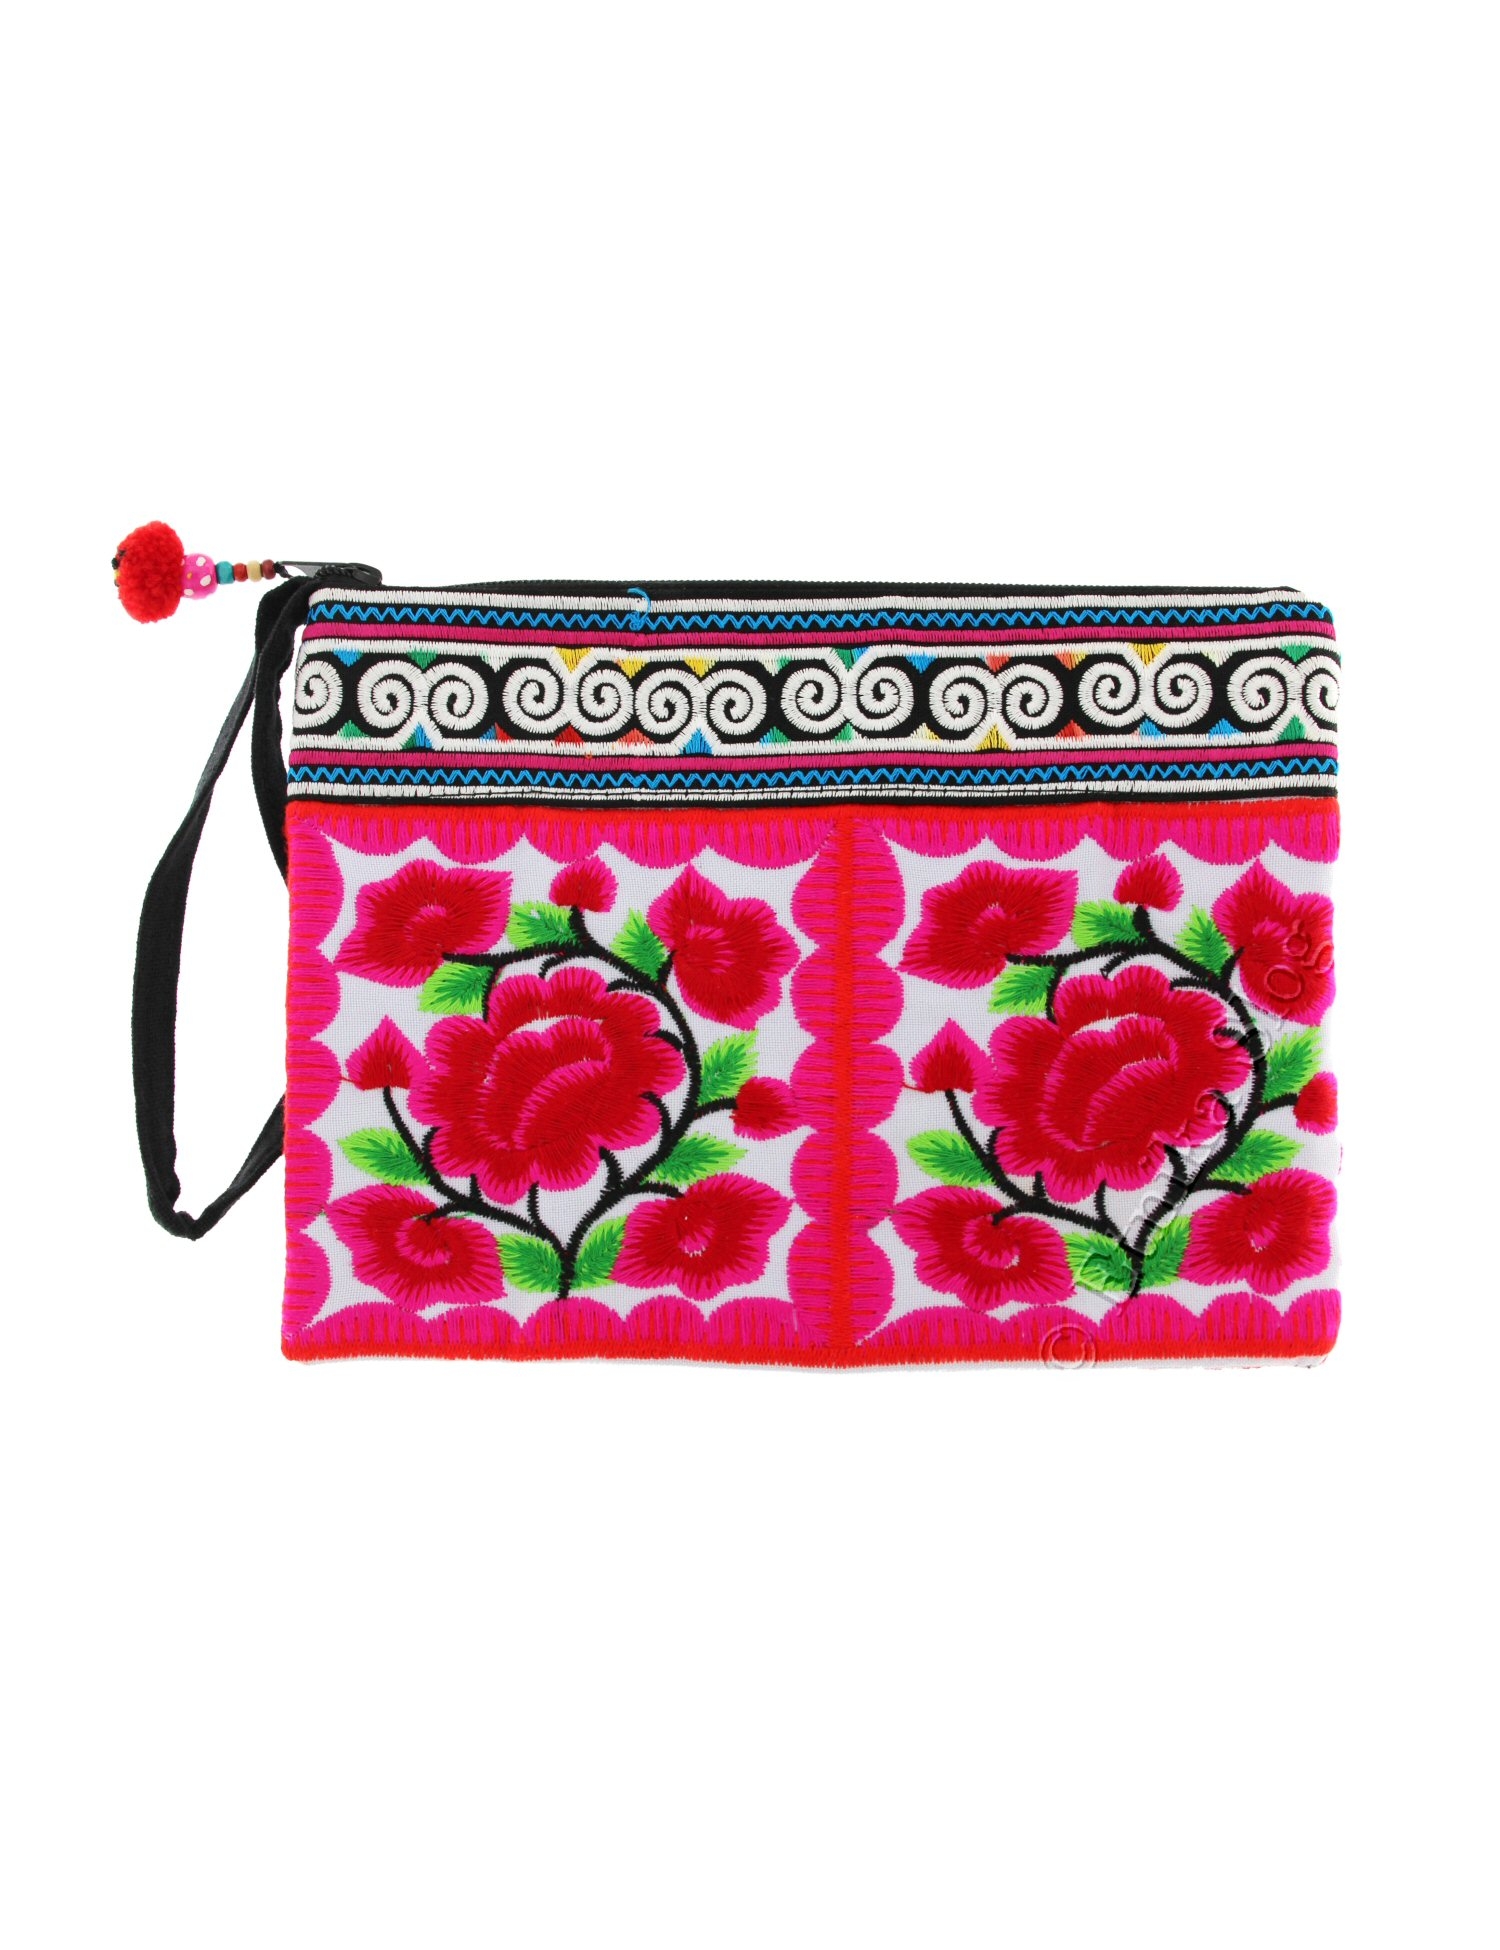 THAI EMBROIDERED BAGS / CLUTCHES BS-THD19-01 - Oriente Import S.r.l.